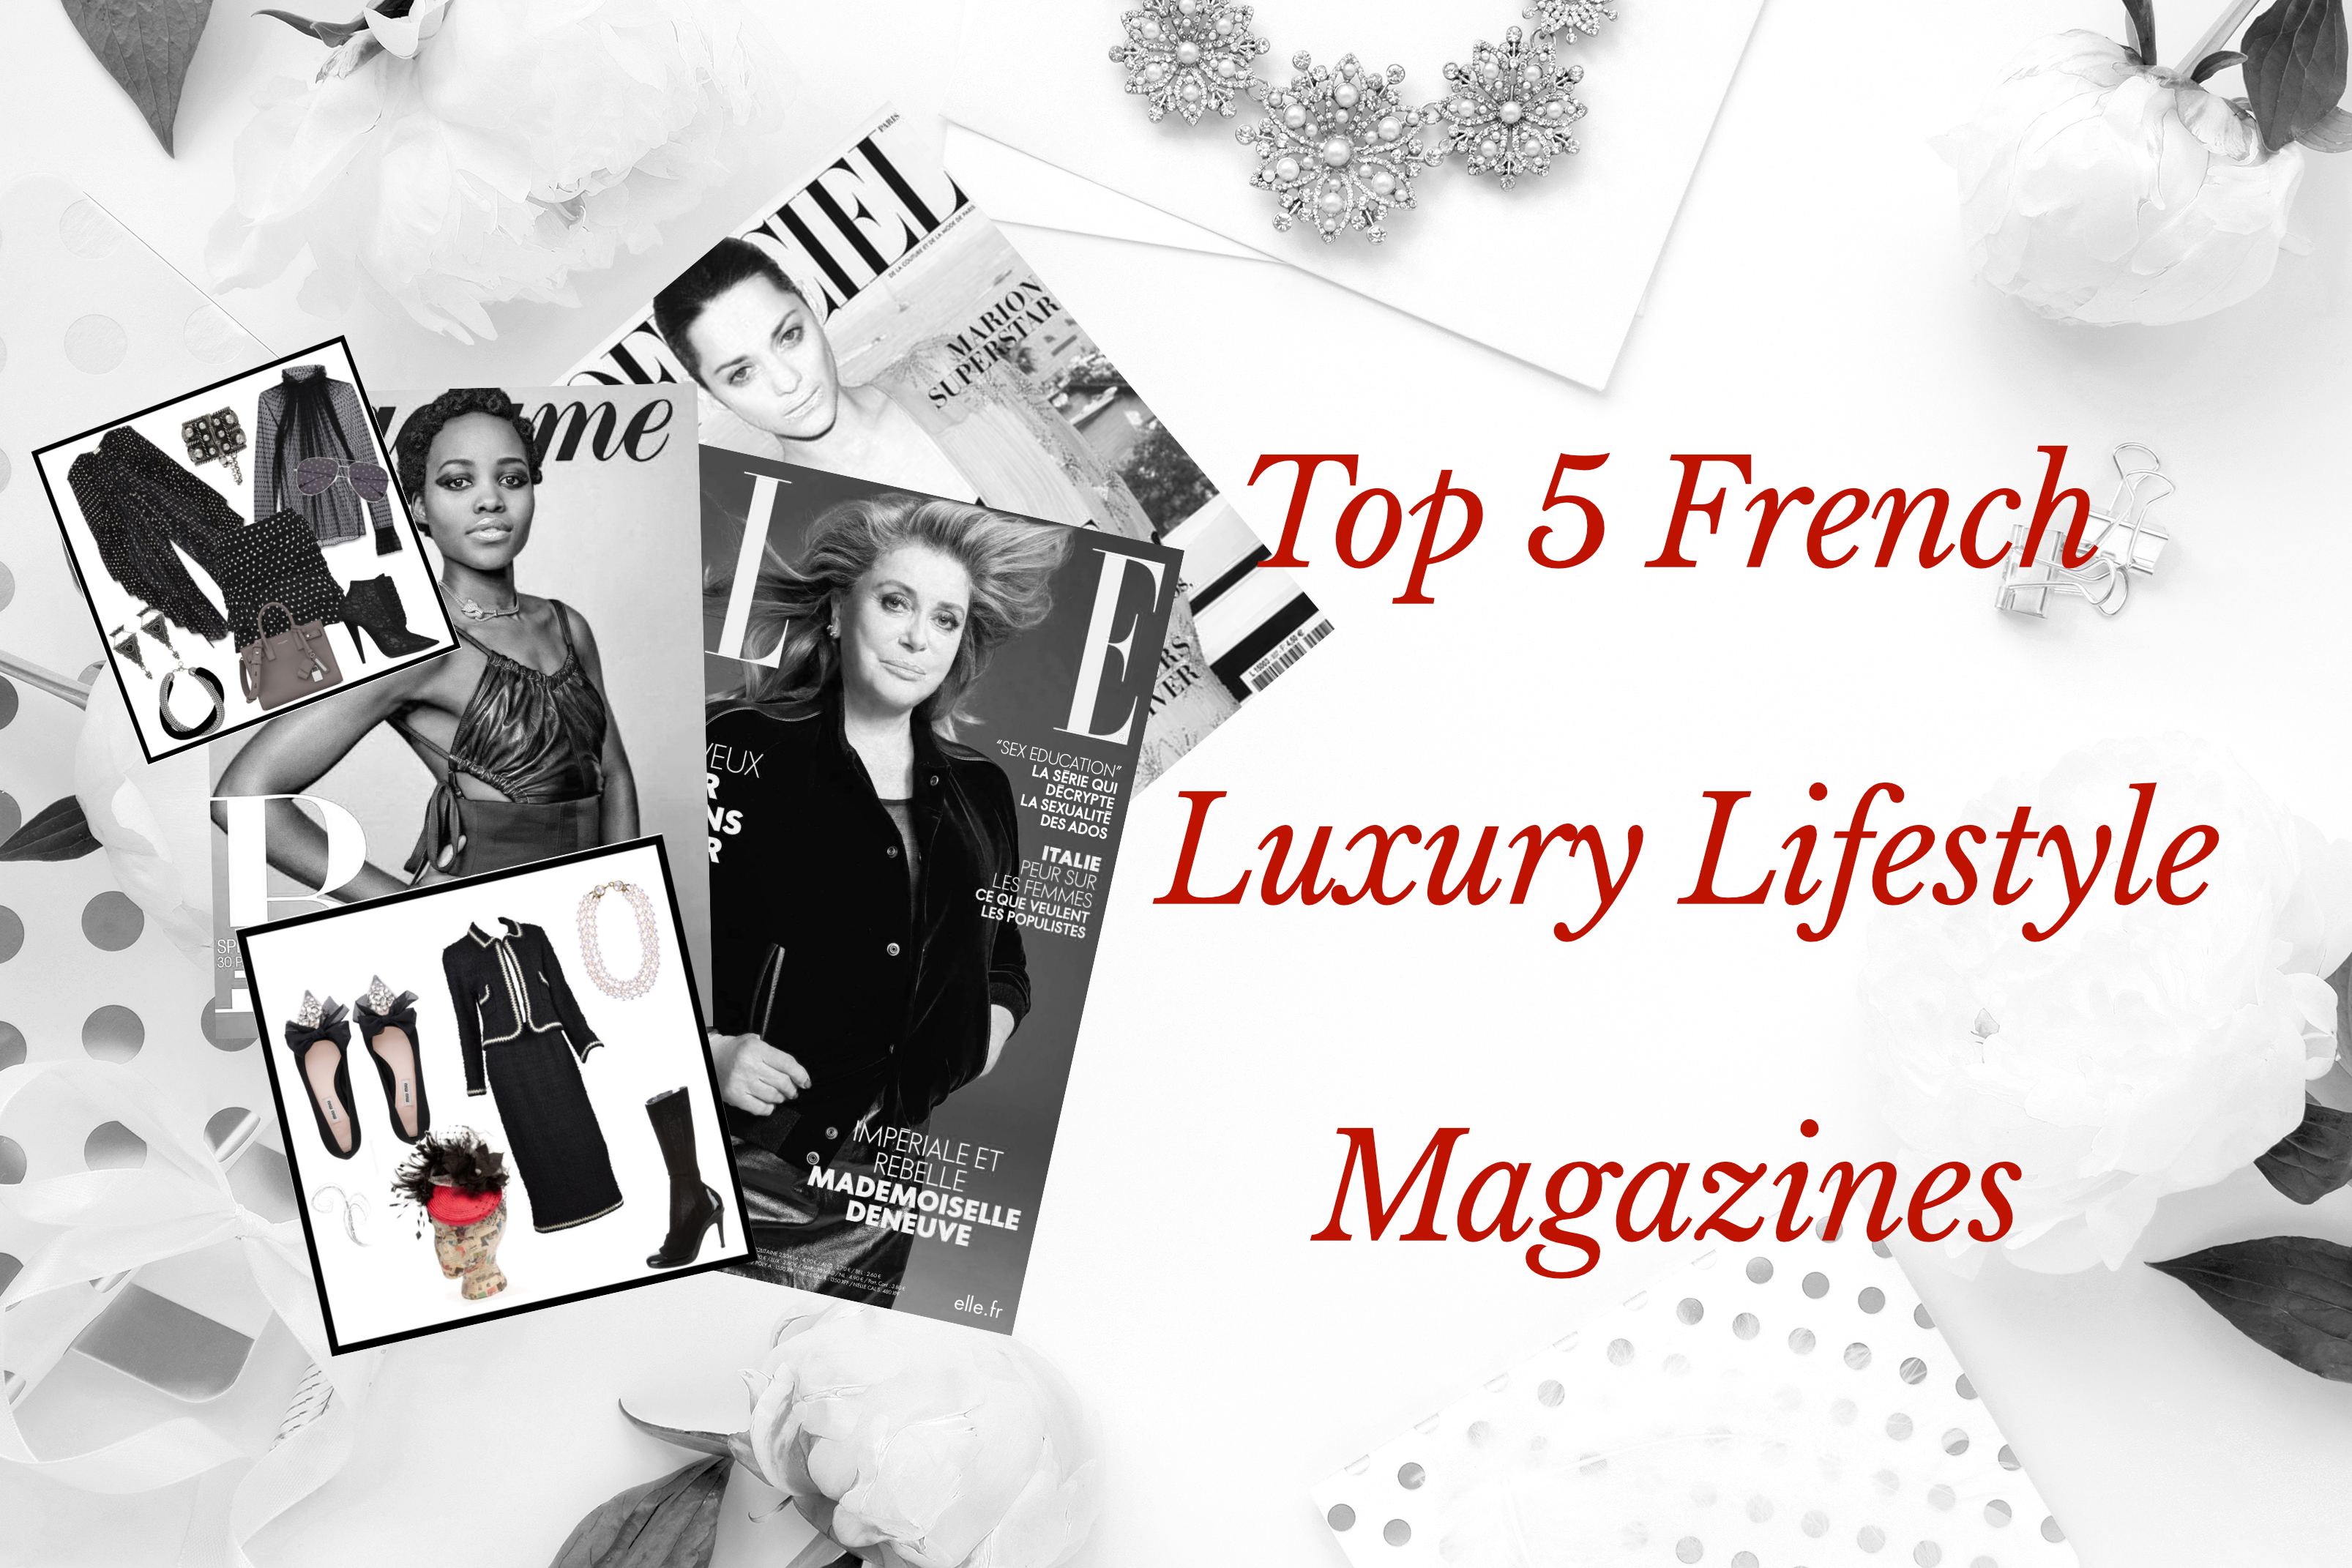 Top 5 French Luxury Lifestyle Magazines Most Read